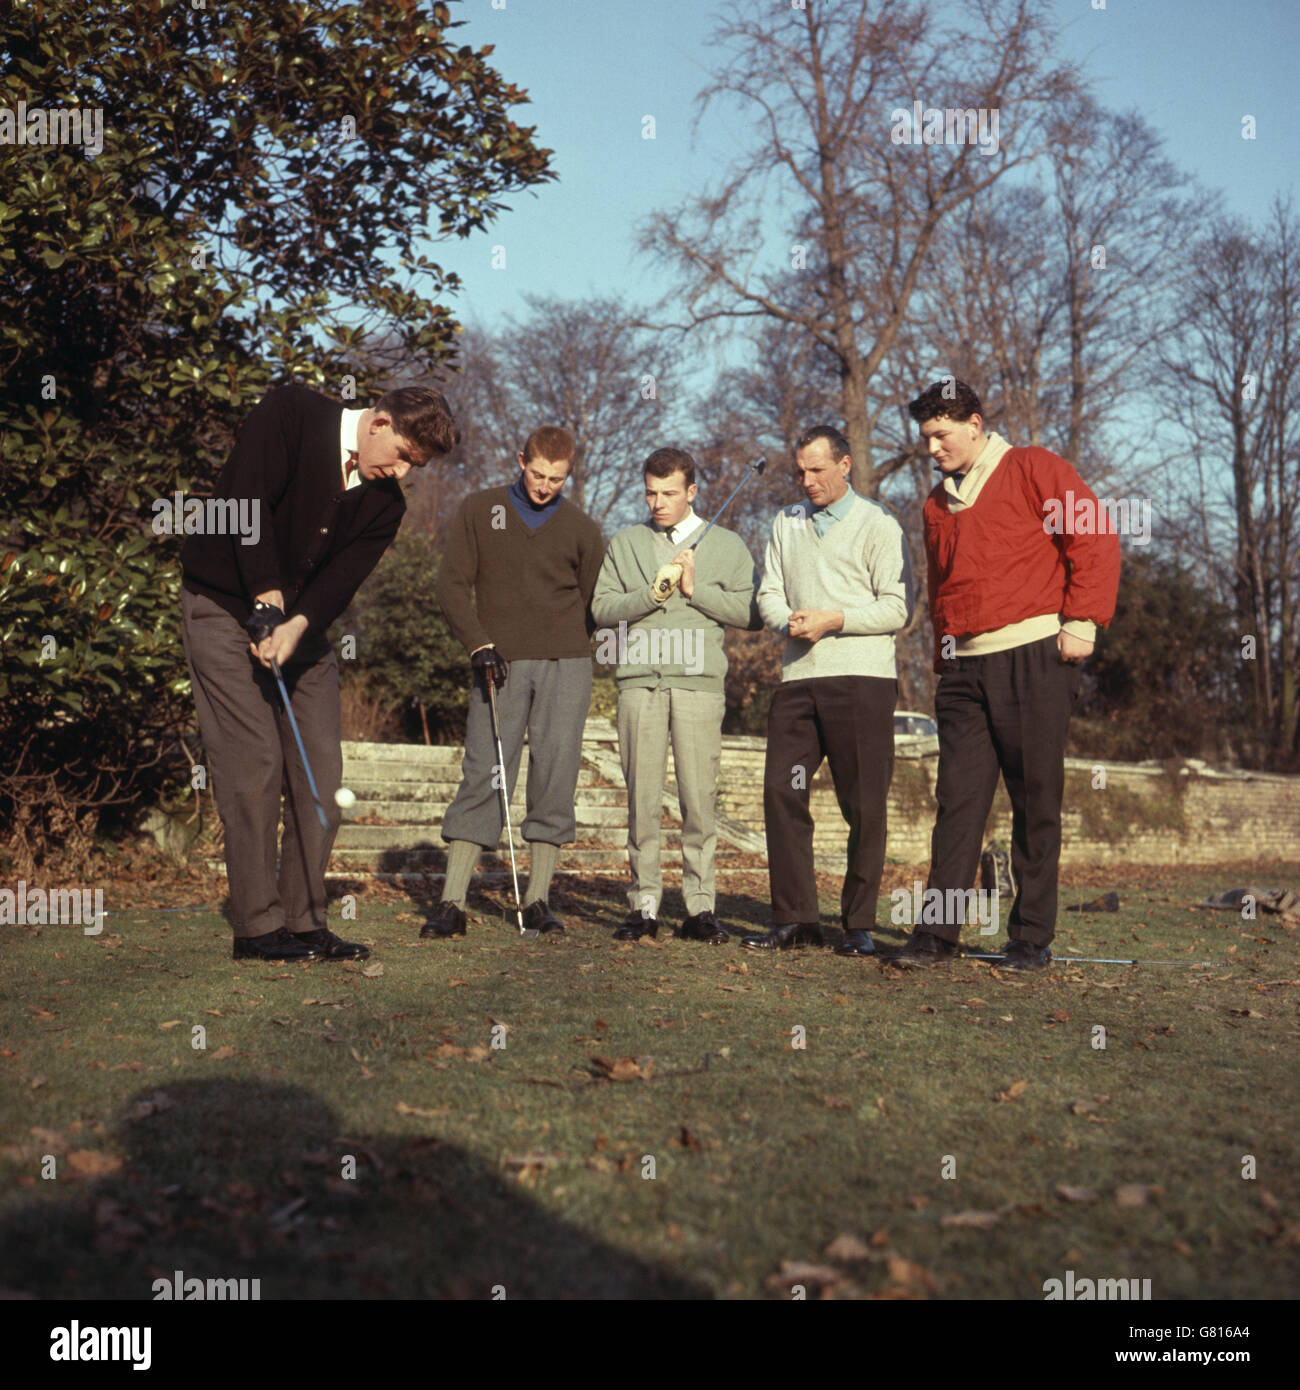 Max Faulkner is seen (2nd from left) during a coaching session with four Butten Boys, Britain's young golfing hopes, at Sundridge Park, Kent, who are being given his specialist training and management. Playing is Alan Ibberson, 22 from Worksop, and the others are (l-r) Iain Clark, 17 from St. Andrews, Tommy Horton, 23 from Jersey and Brian Barnes, 19 from Somerset. Stock Photo